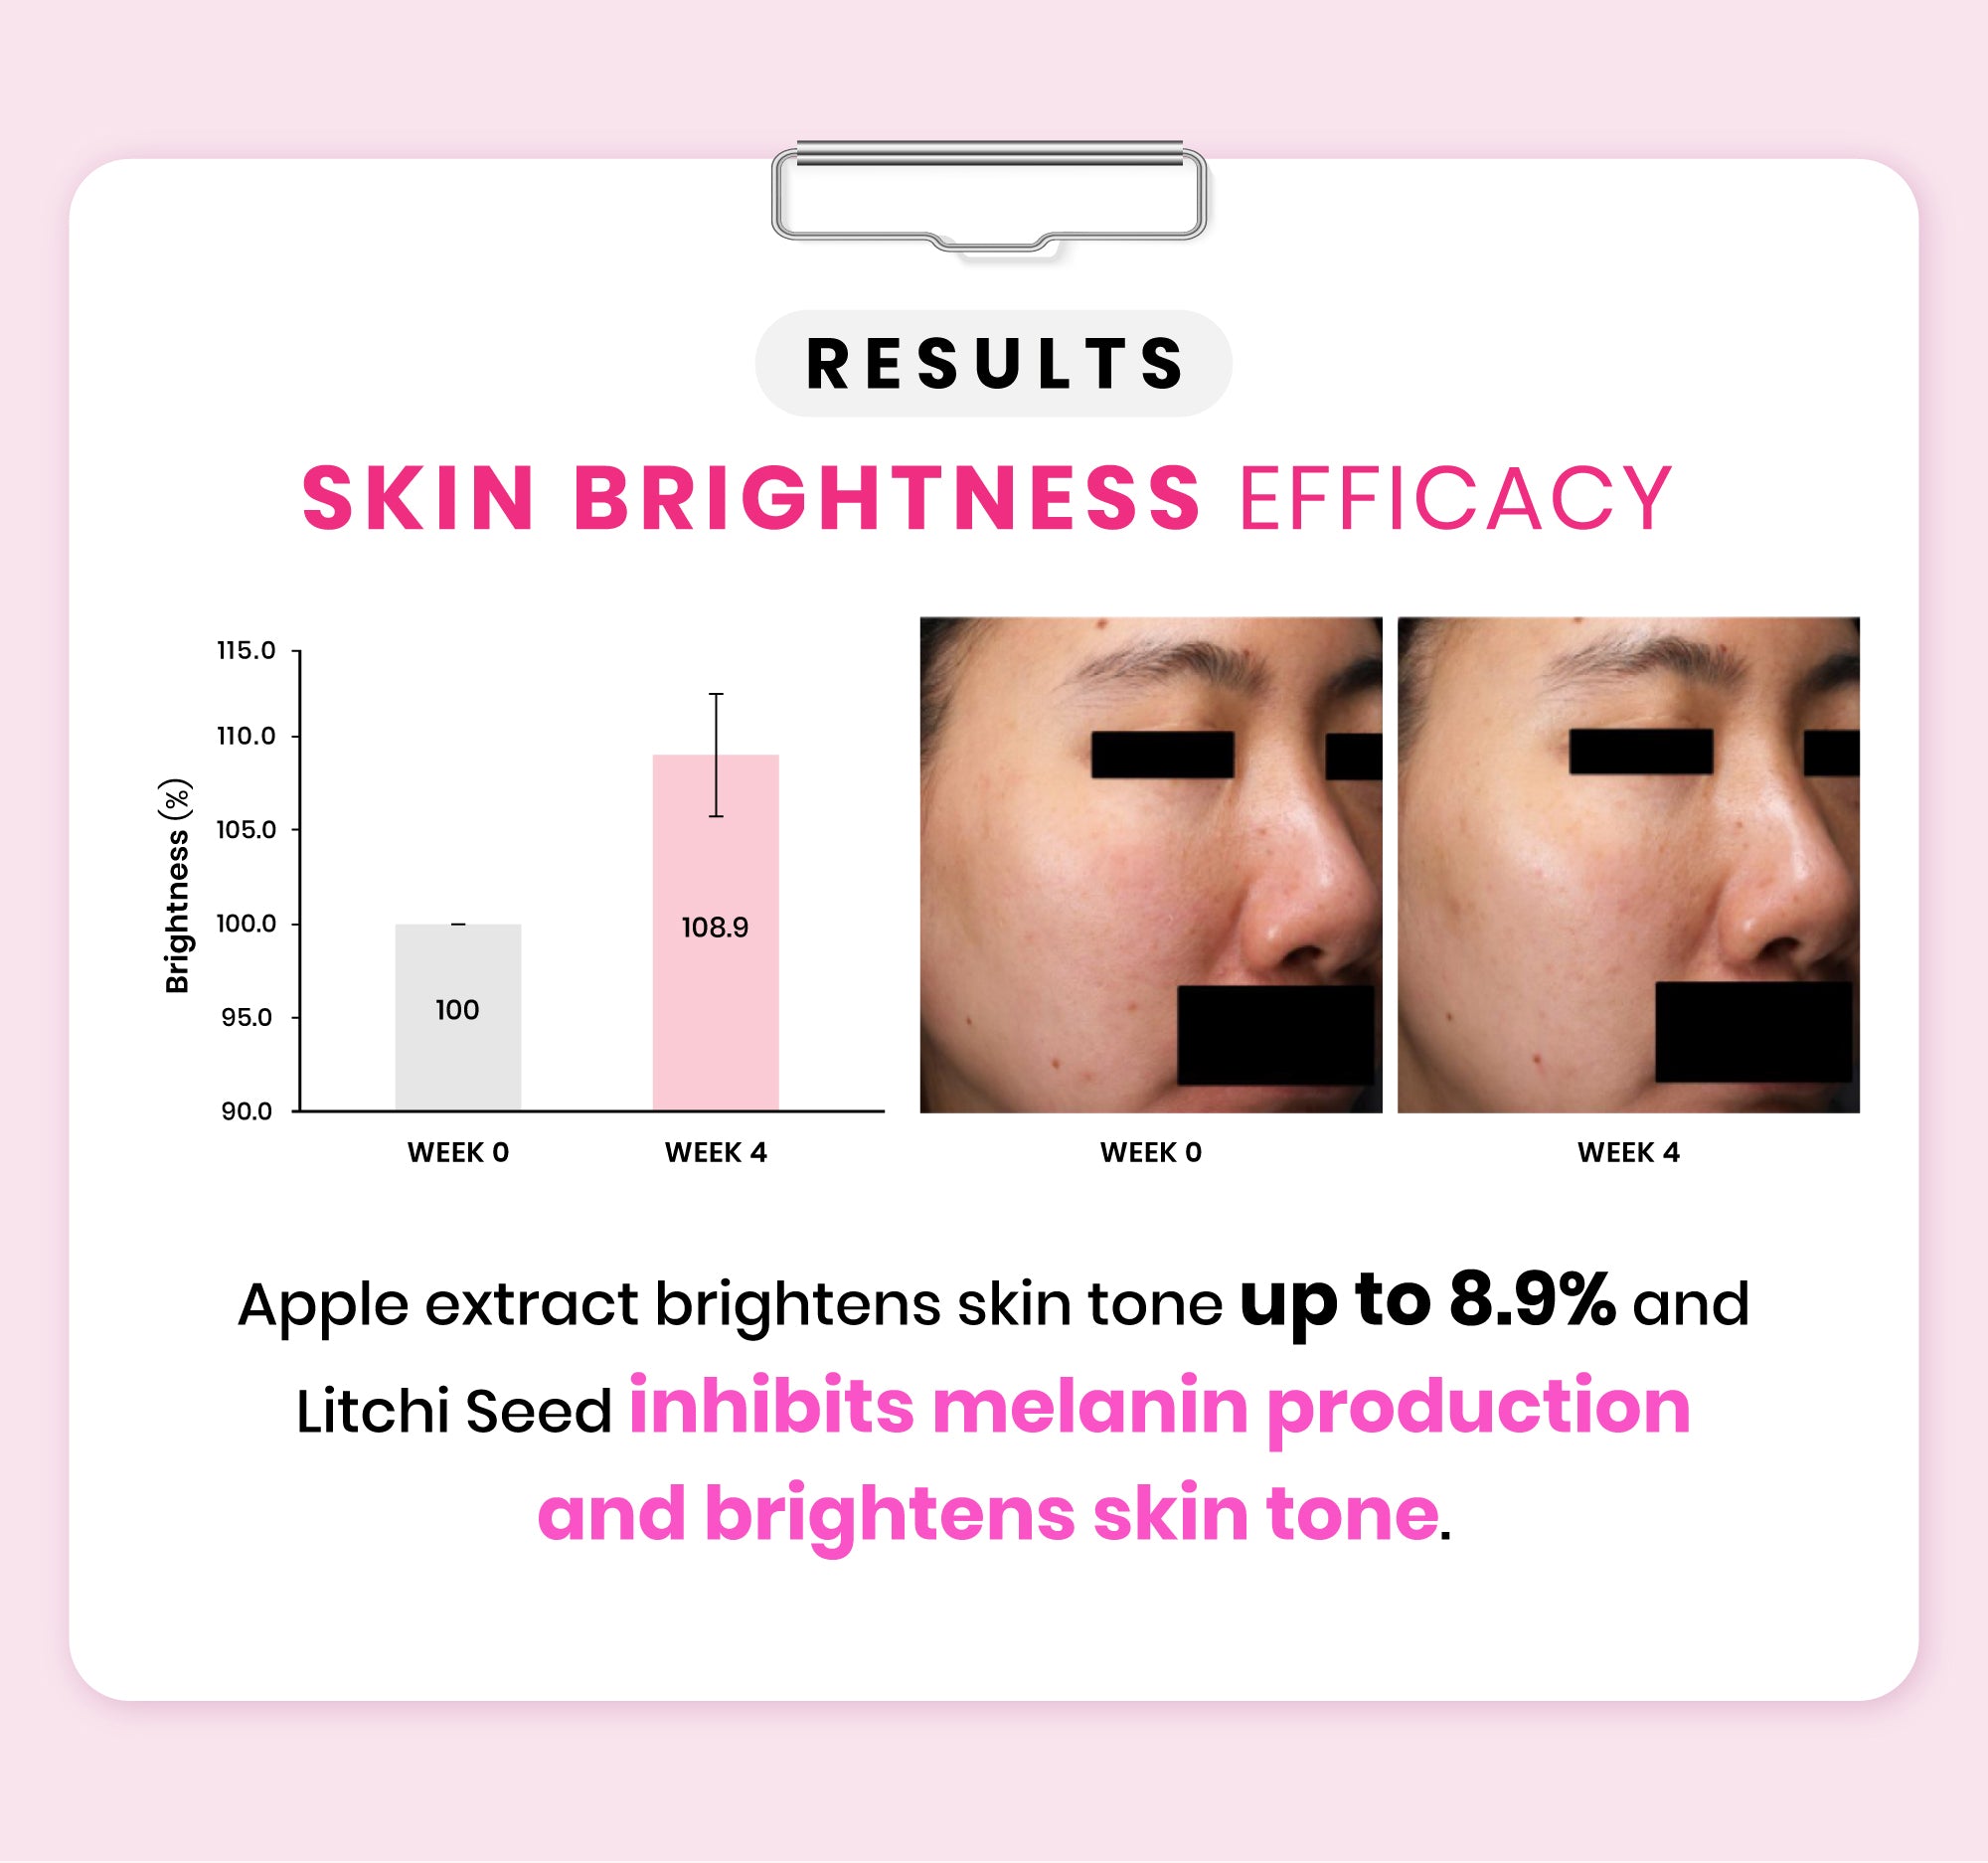 Avalon Stemcell Beauty Drink contains Apple extract that helps to brighten skin tone up to 8.9%. Besides, it contains Litchi seed in inhibiting the melanin production and brightening the skin tone.